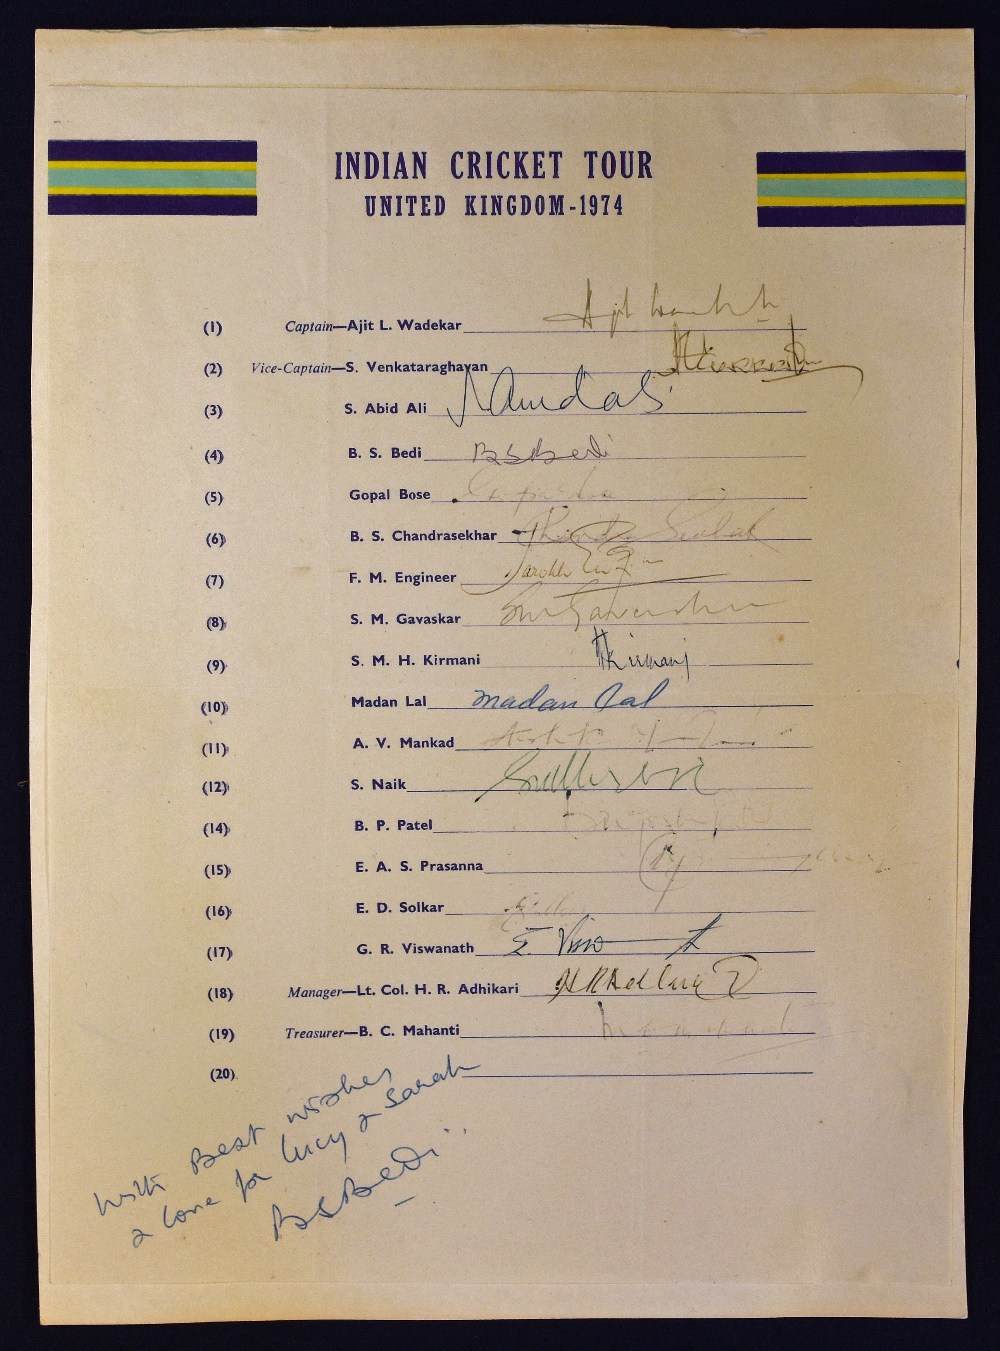 1974 Indian Cricket Tour Signed Team Sheet to include 19 signatures such as Wadekar,